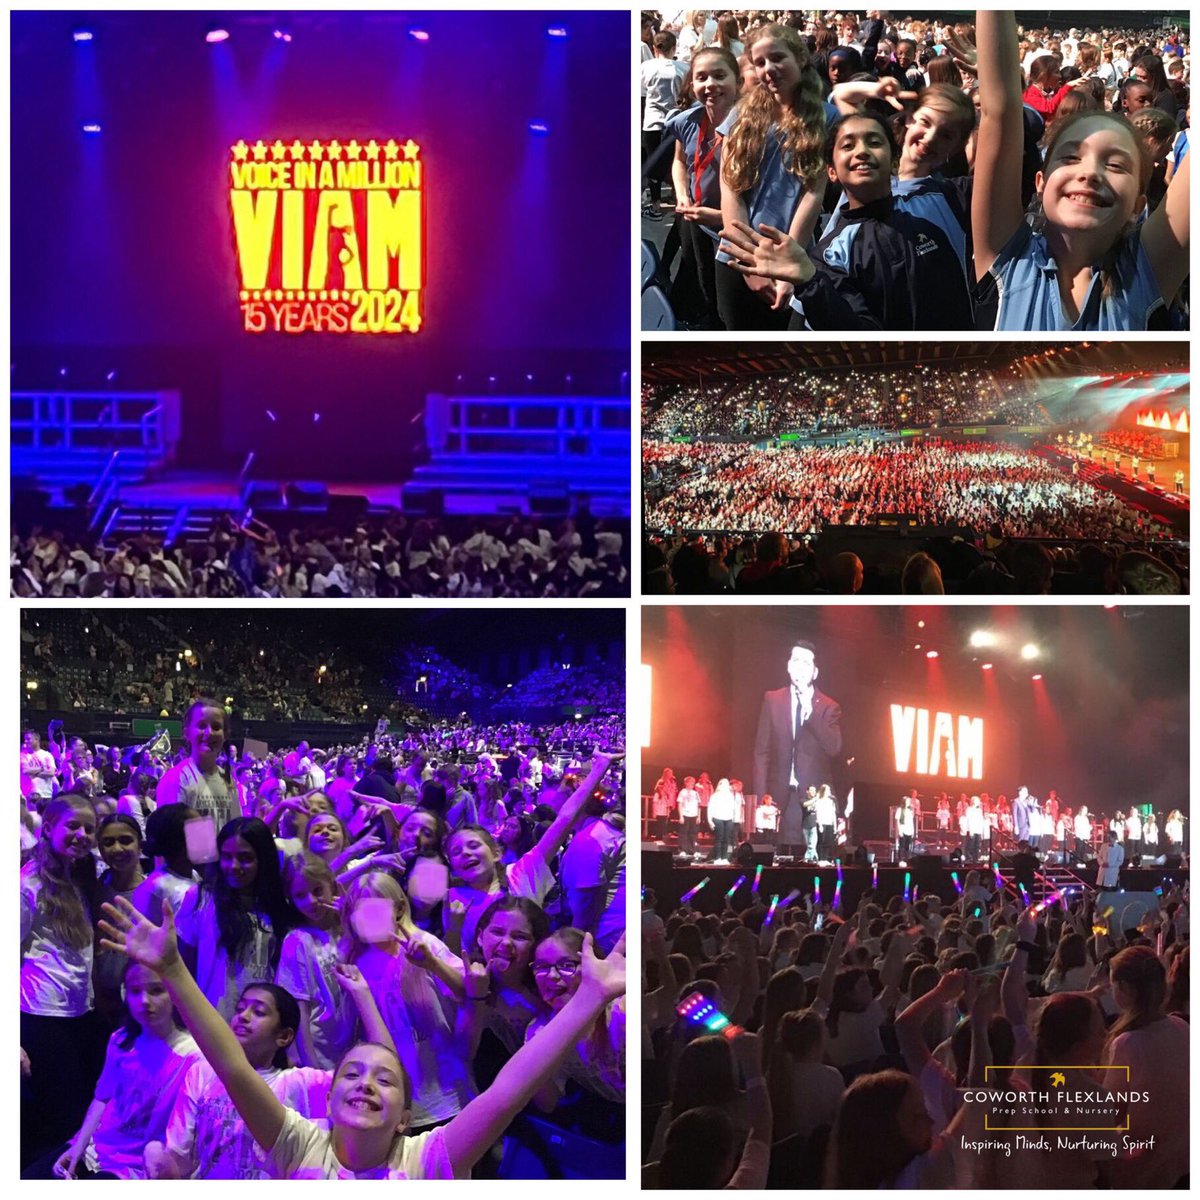 Voice in a Million 2024! An amazing experience and memories we will never forget! @VIAM01 #InspiringMinds #NurturingSpirit #HappinessGetsResults #VIAM 🎤